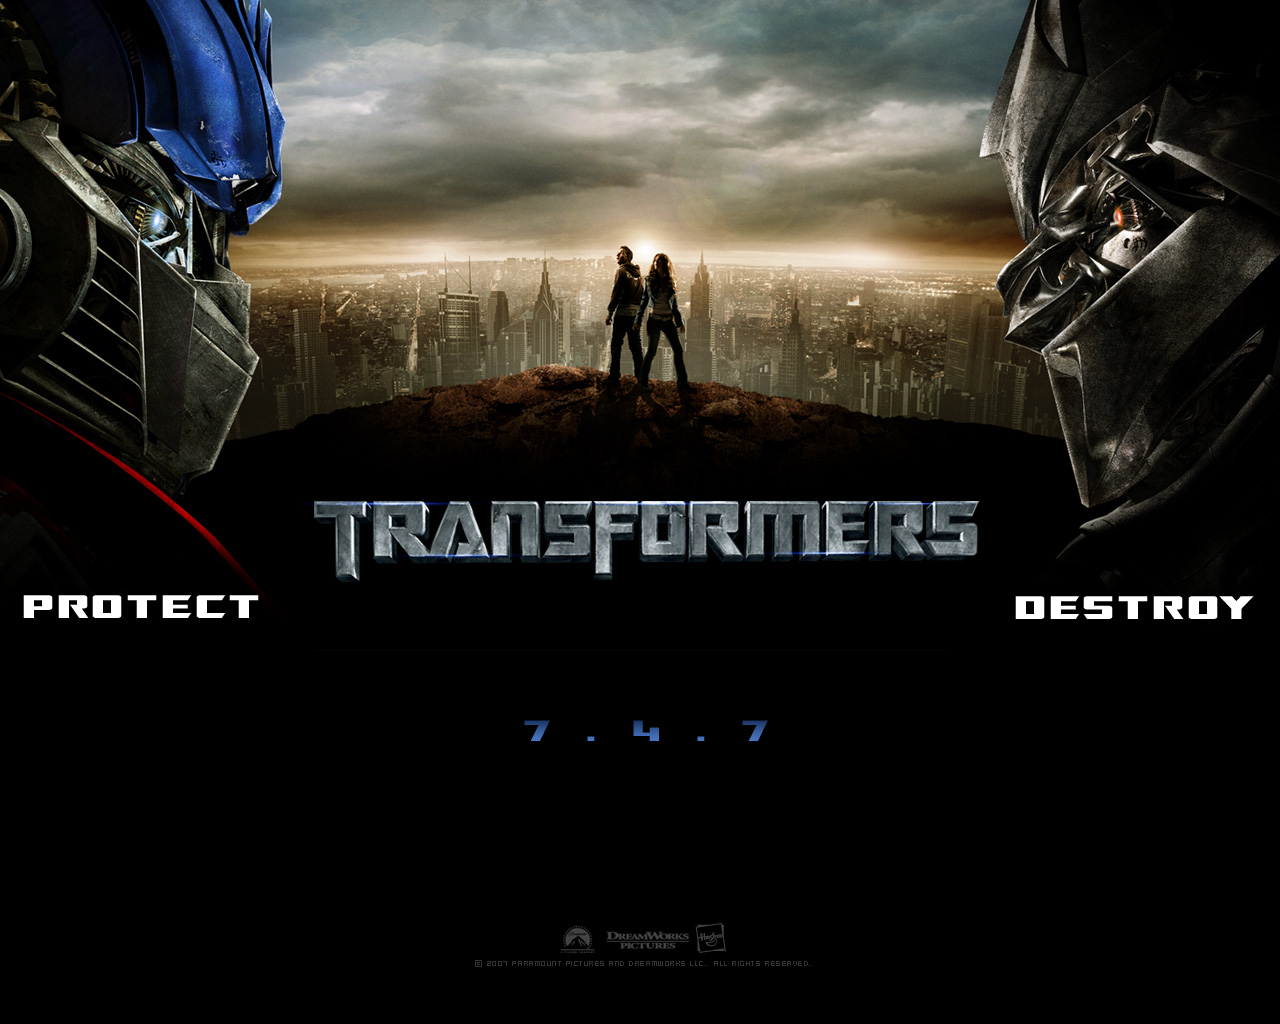 Download full size Transformers wallpaper / Movies / 1280x1024